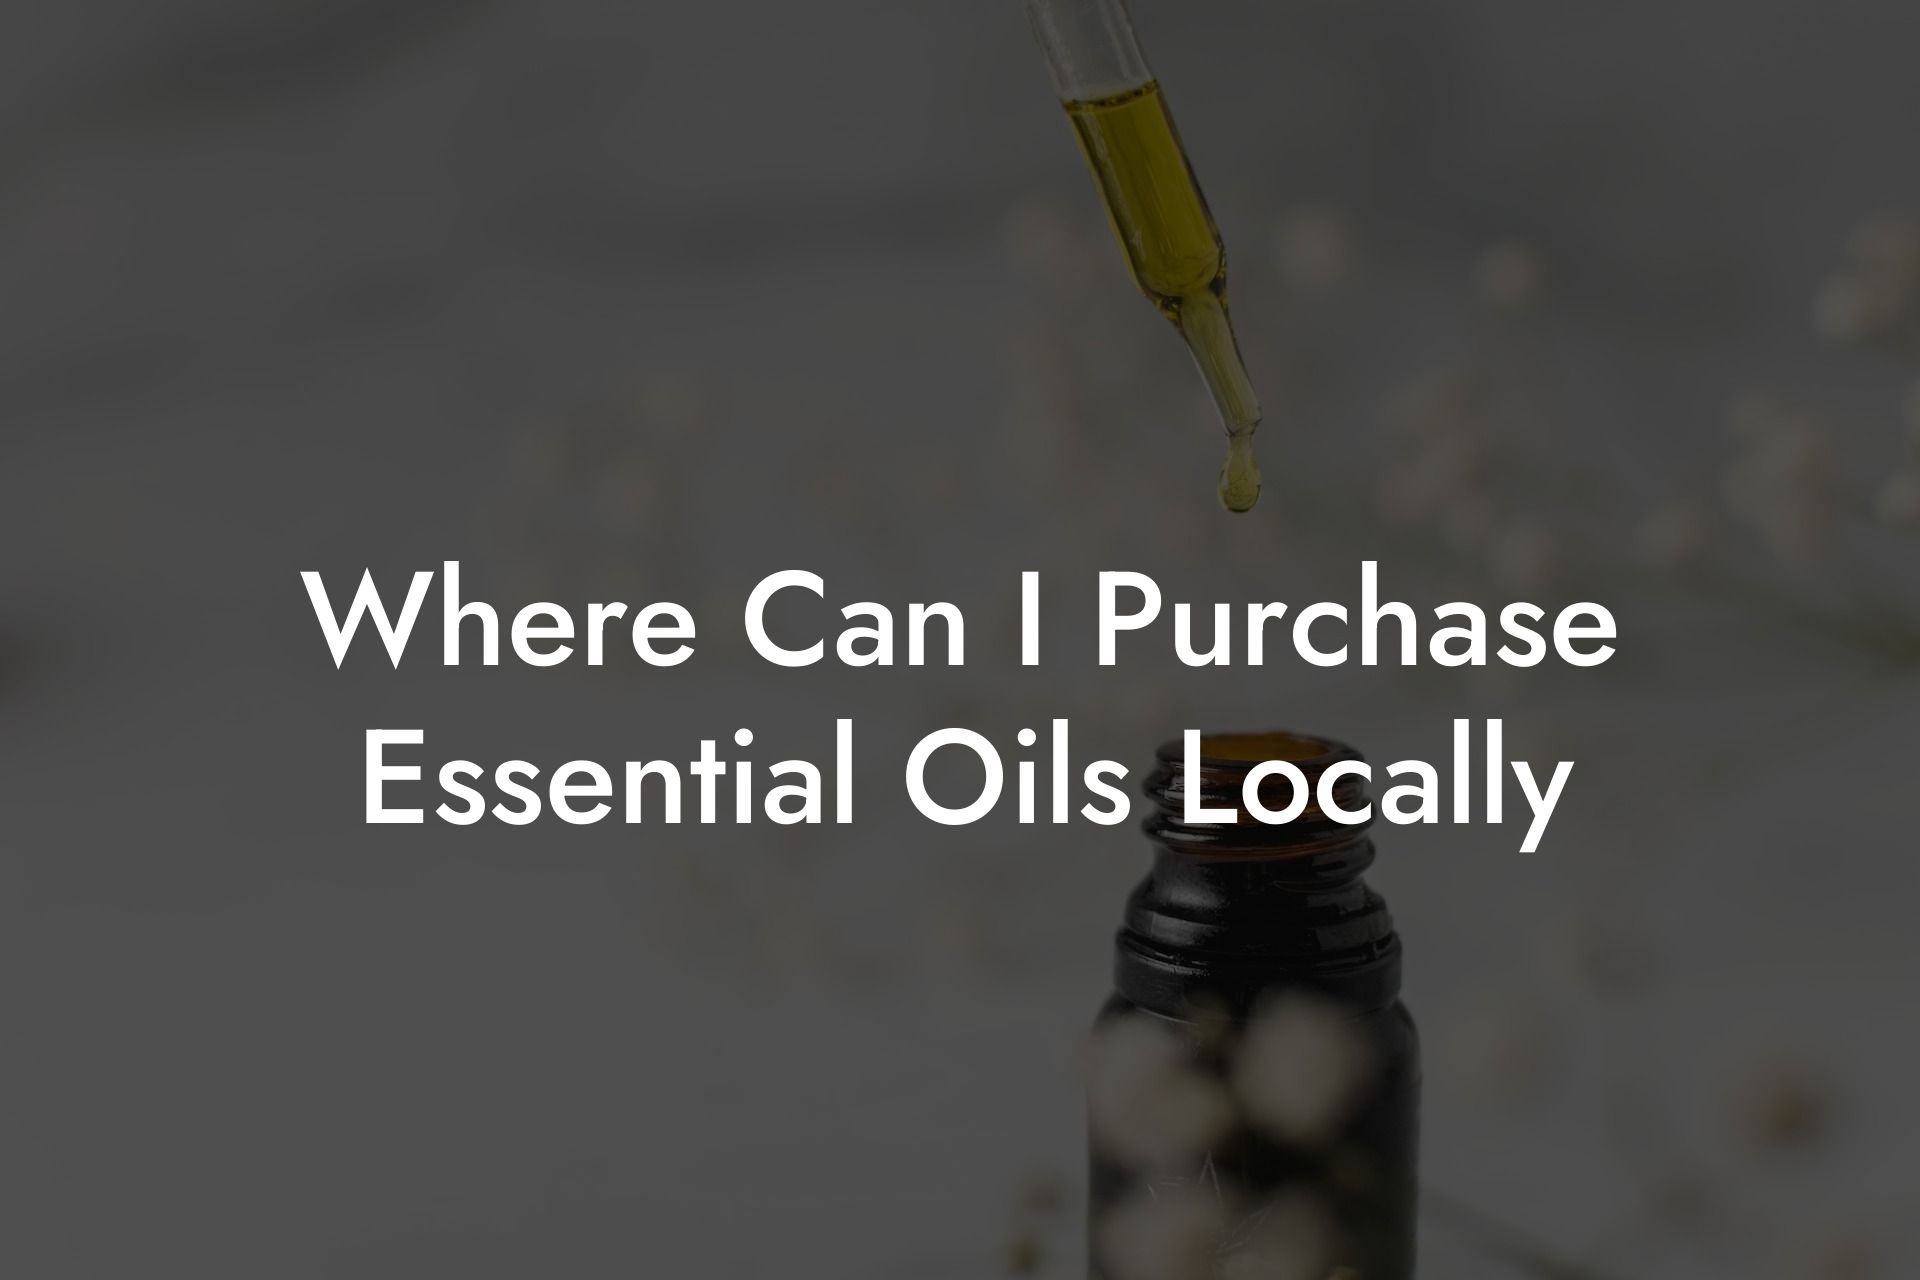 Where Can I Purchase Essential Oils Locally